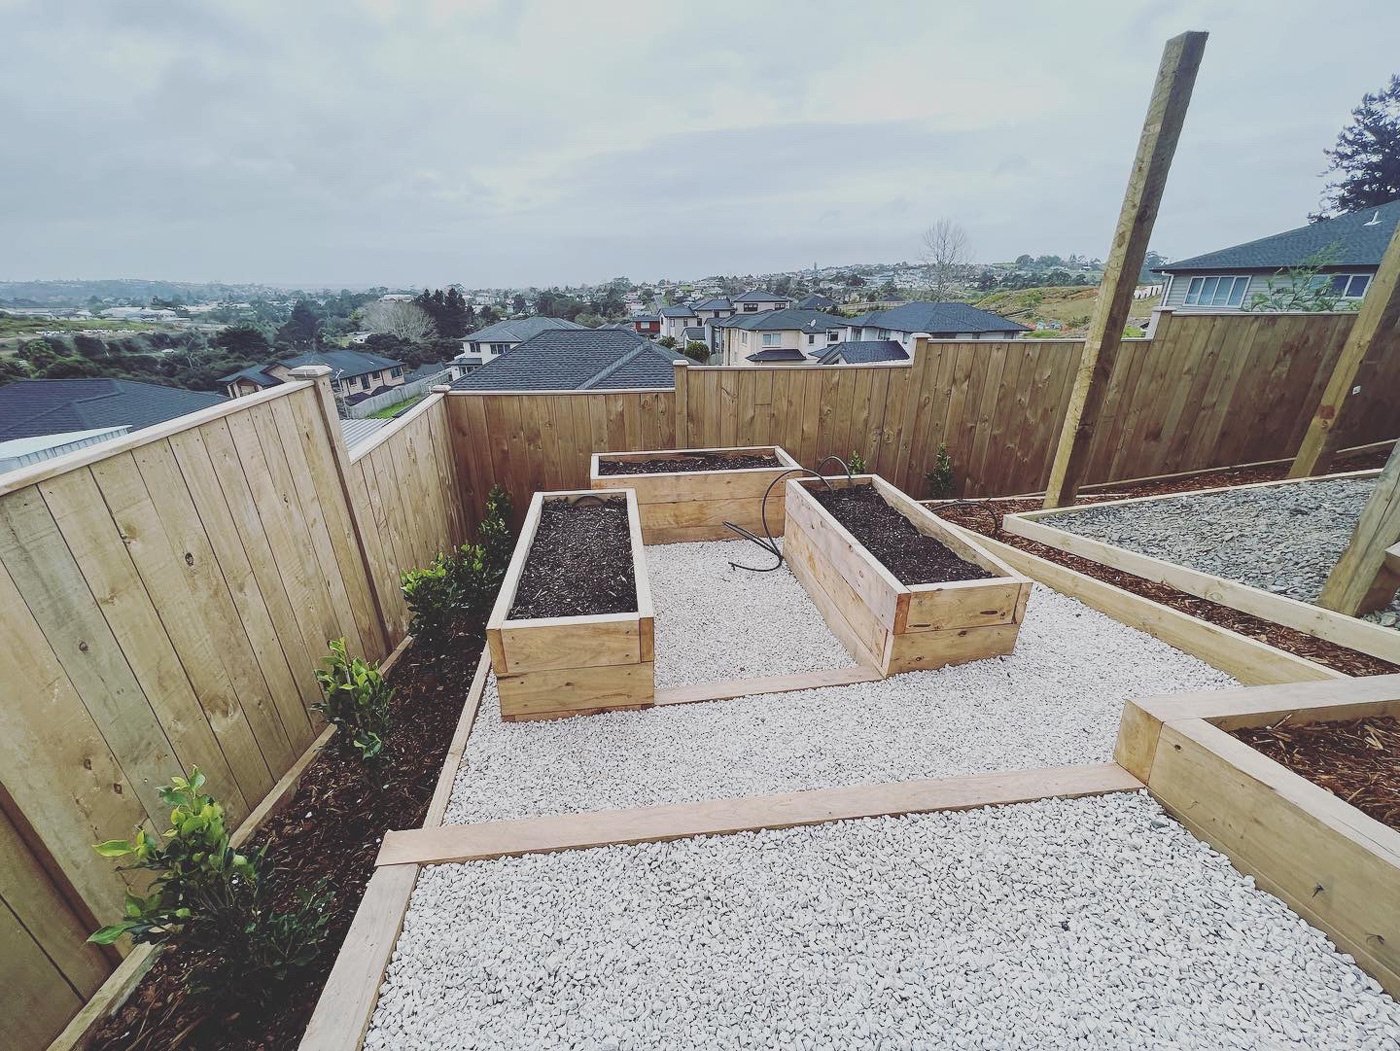 Three newly built vegetable beds raised off the ground in wood casings, surrounded by a white pebble walkway